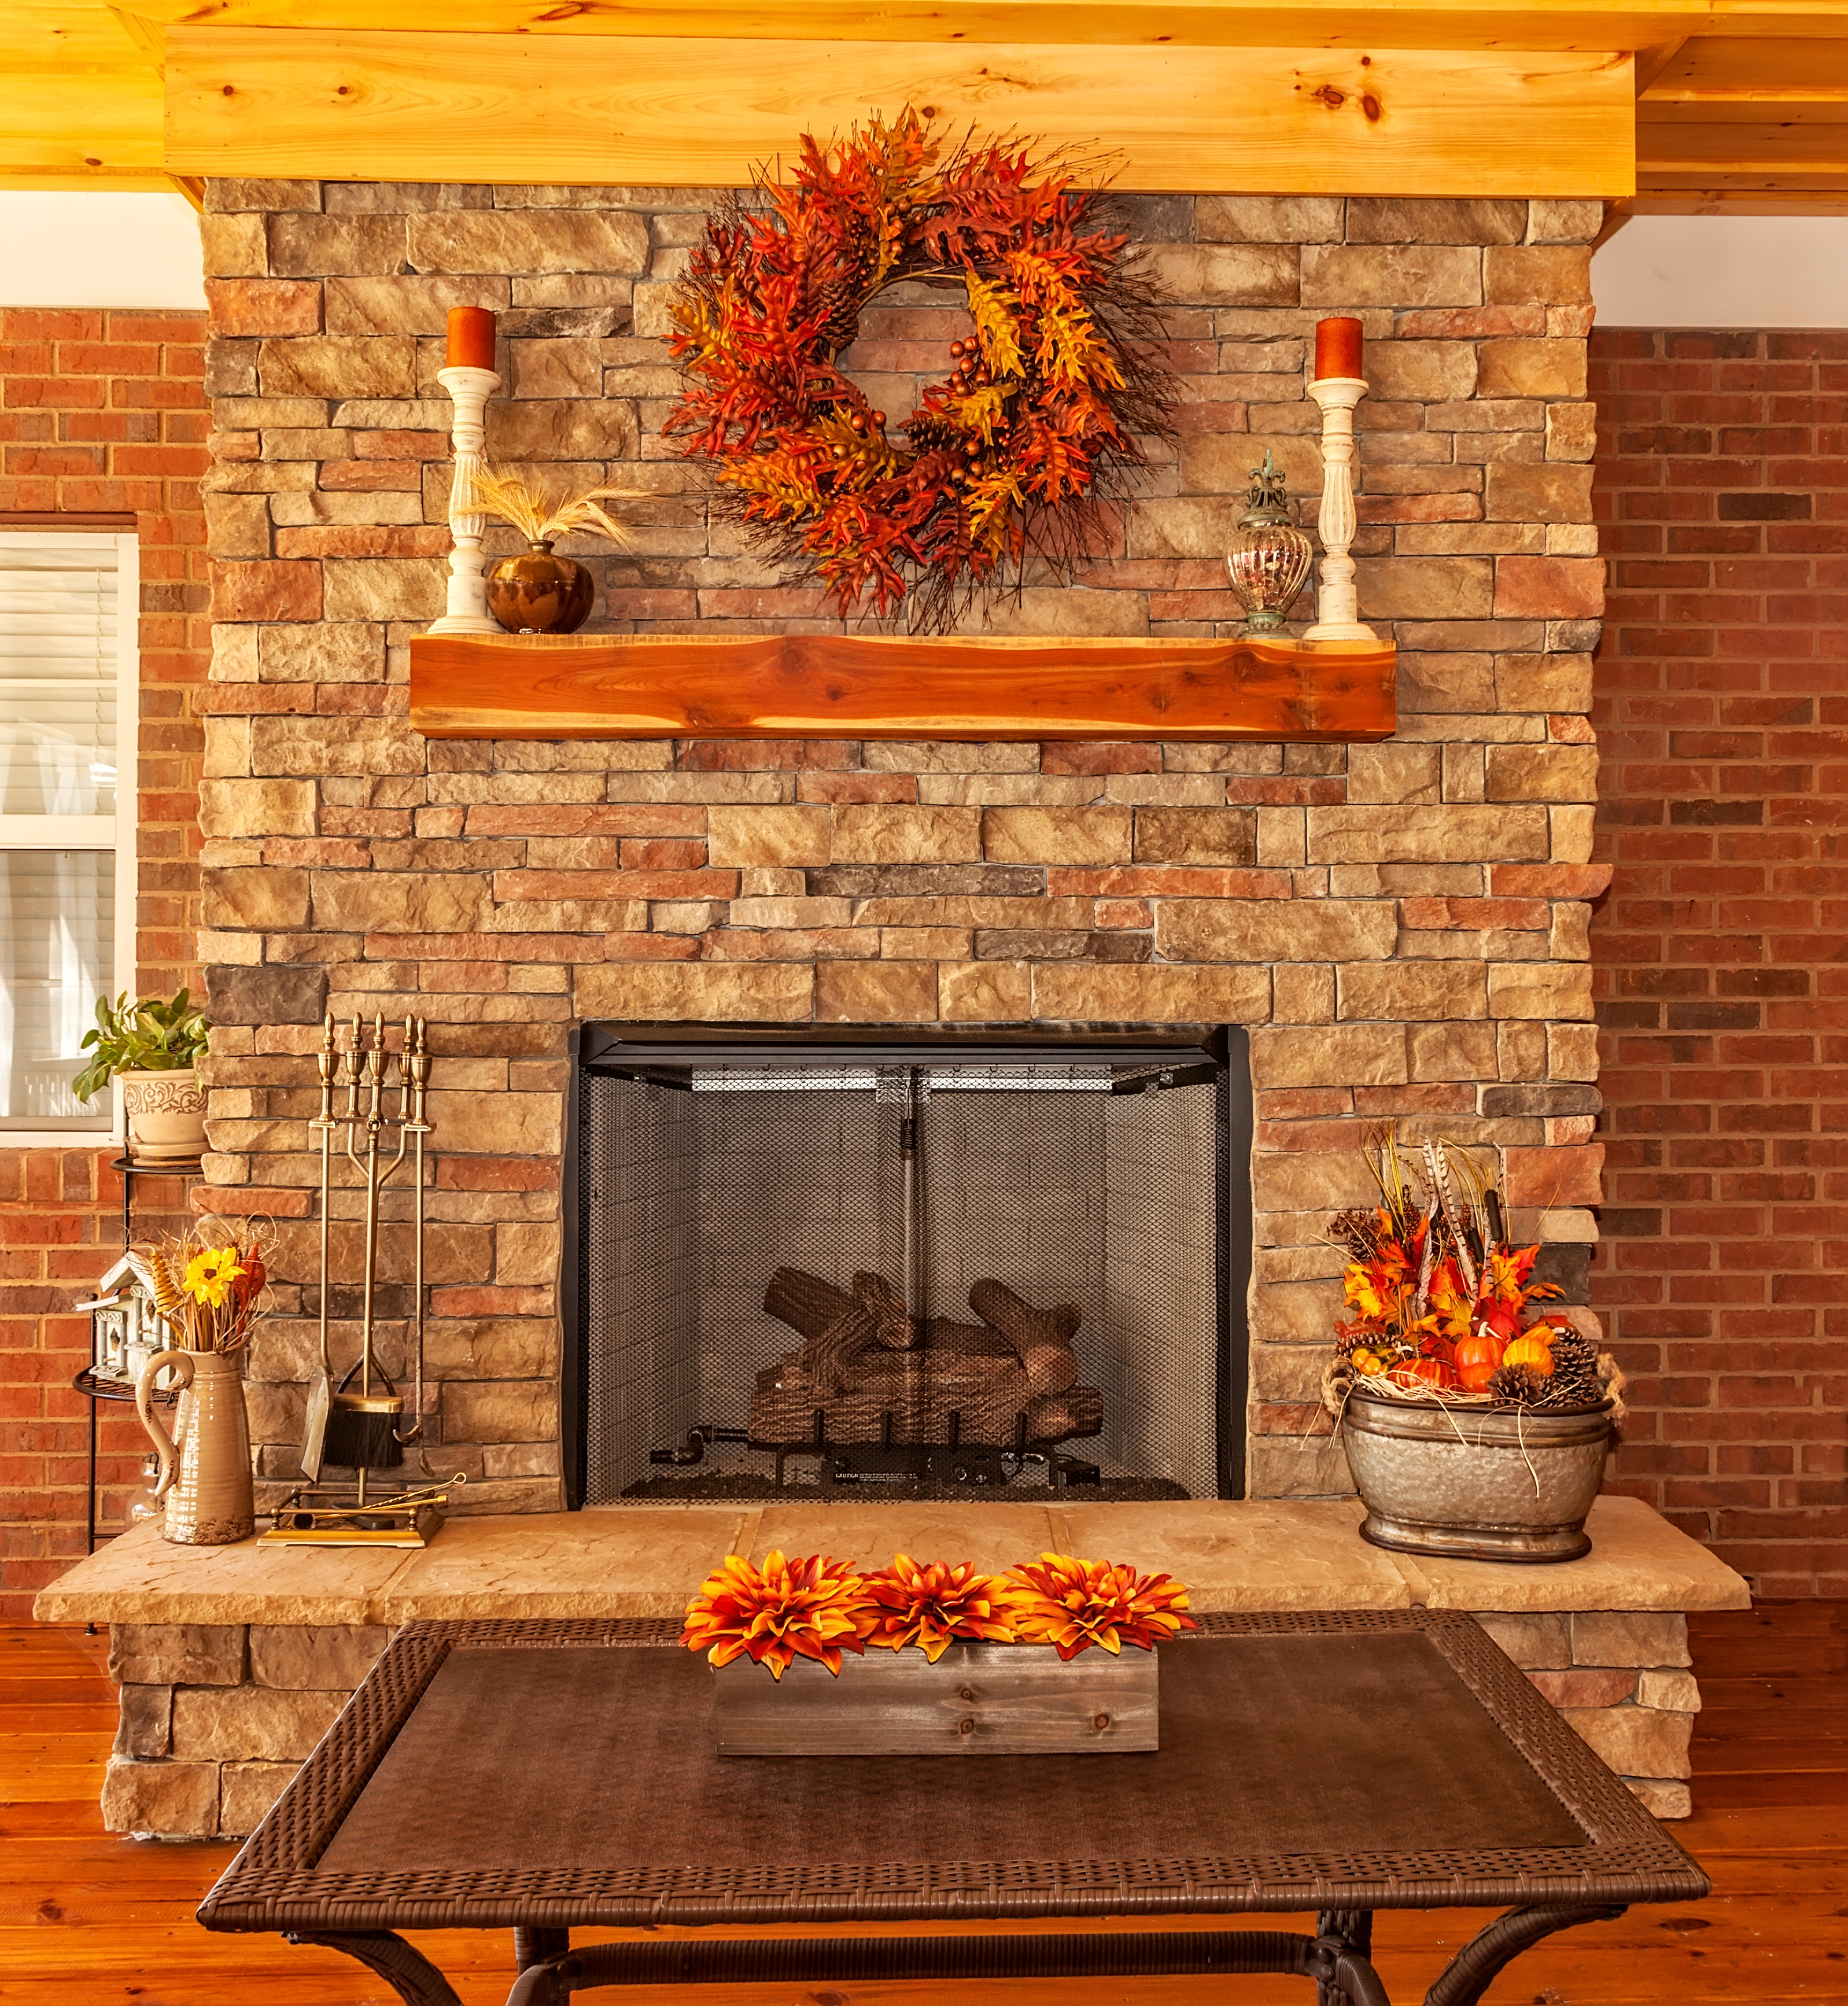 5 Fall Mantel Decorating Ideas That'll Make You Look Like a Pro 111